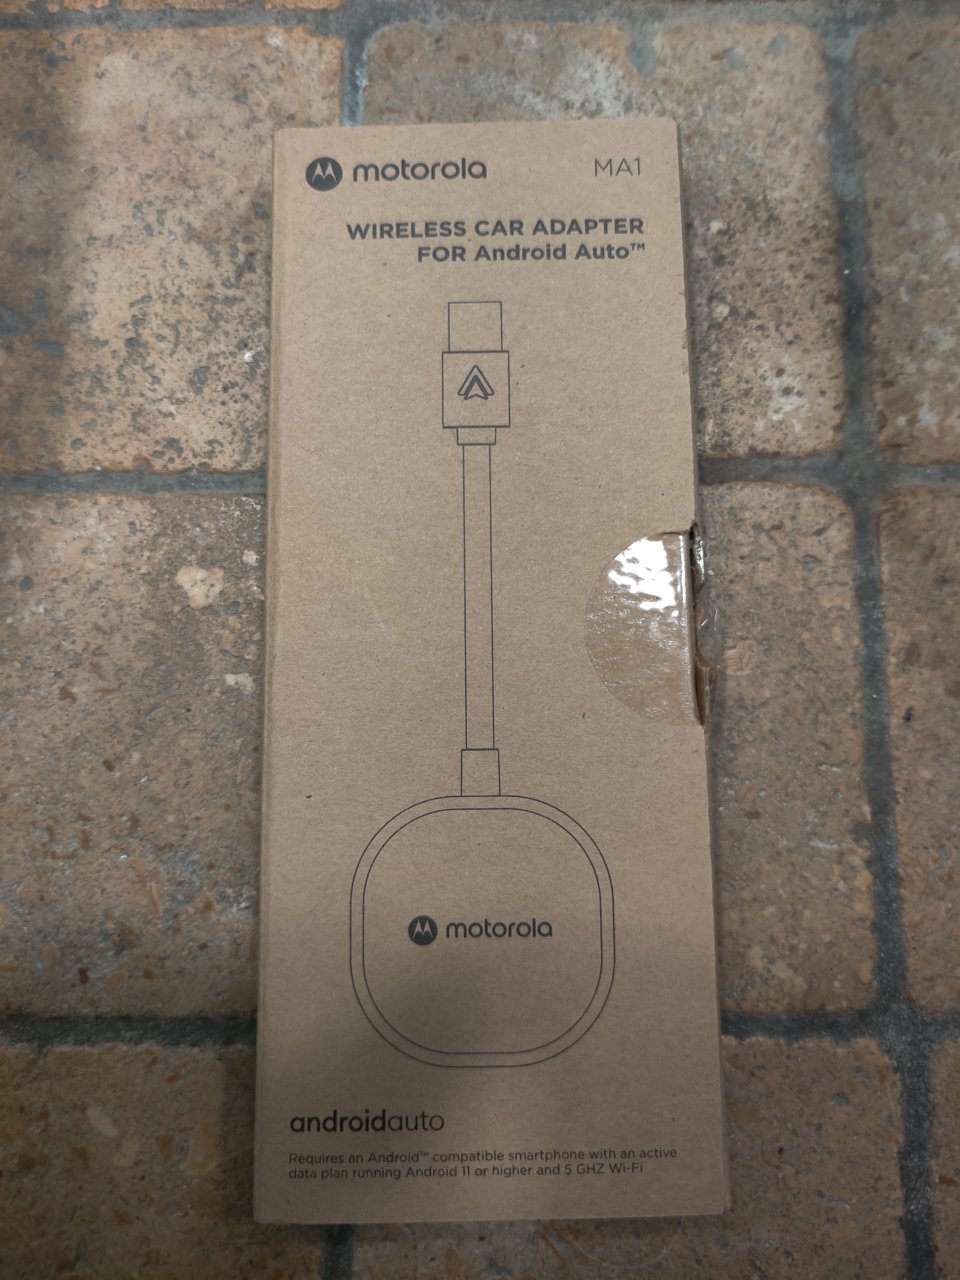  Motorola MA1 Wireless Android Auto Car Adapter - Instant  Connection Using Google-Licensed Bridge Technology From Smartphone To  Screen - USB Type-A Plug-in - Secure Gel Pad